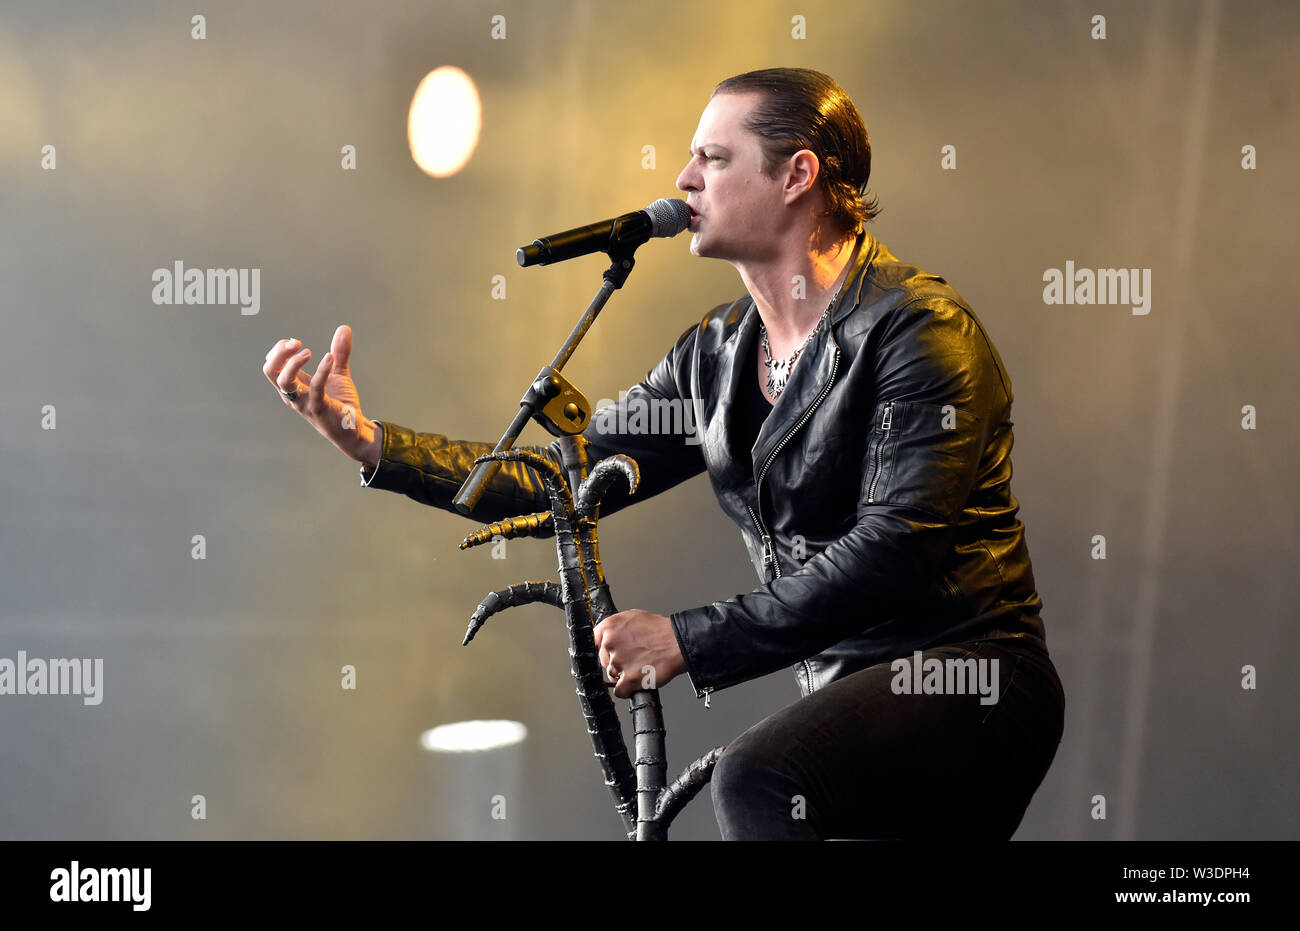 Vizovice, Czech Republic. 13th July, 2019. Singer SIGURD WONGRAVEN performs with Norwegian black metal band Satyricon during the international open-air festival Masters of Rock, in Vizovice, Czech Republic, July 13, 2019. Festival Masters of Rock will take place from Thursday 11th to Sunday 14th July 2019 in the beloved area of the R. Jelinek distillery in Vizovice. Credit: Dalibor Gluck/CTK Photo/Alamy Live News Stock Photo